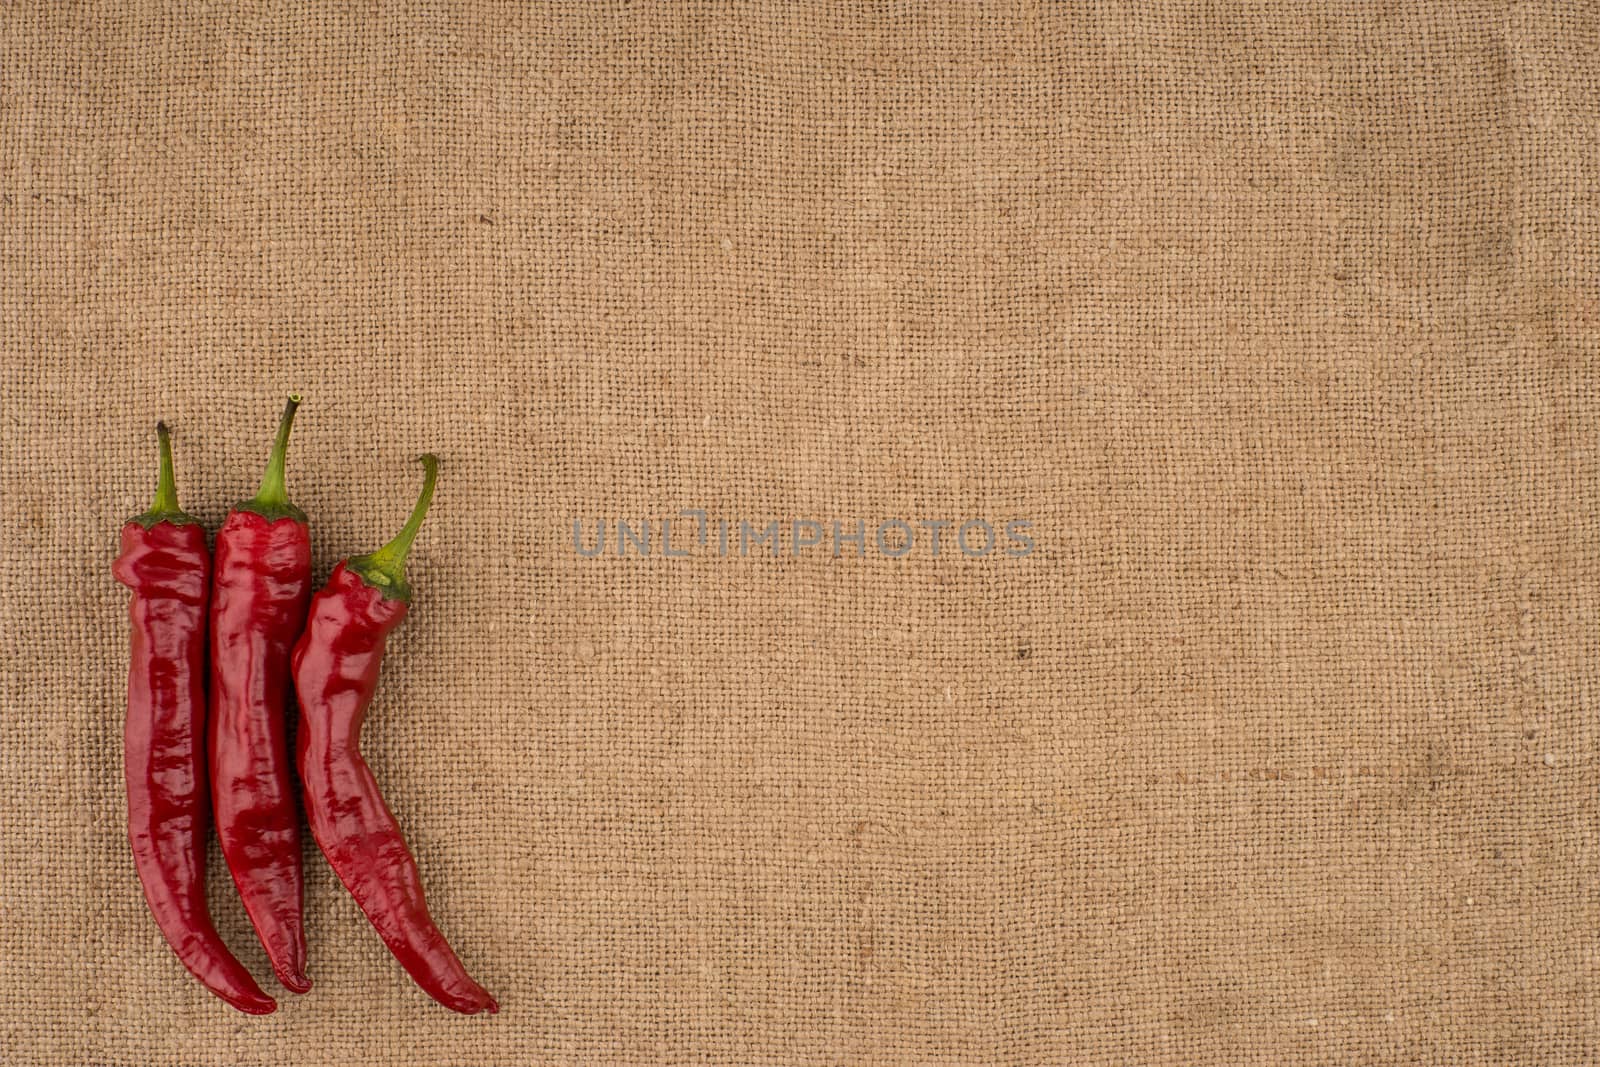 Red chili on burlap. Top view. by DGolbay